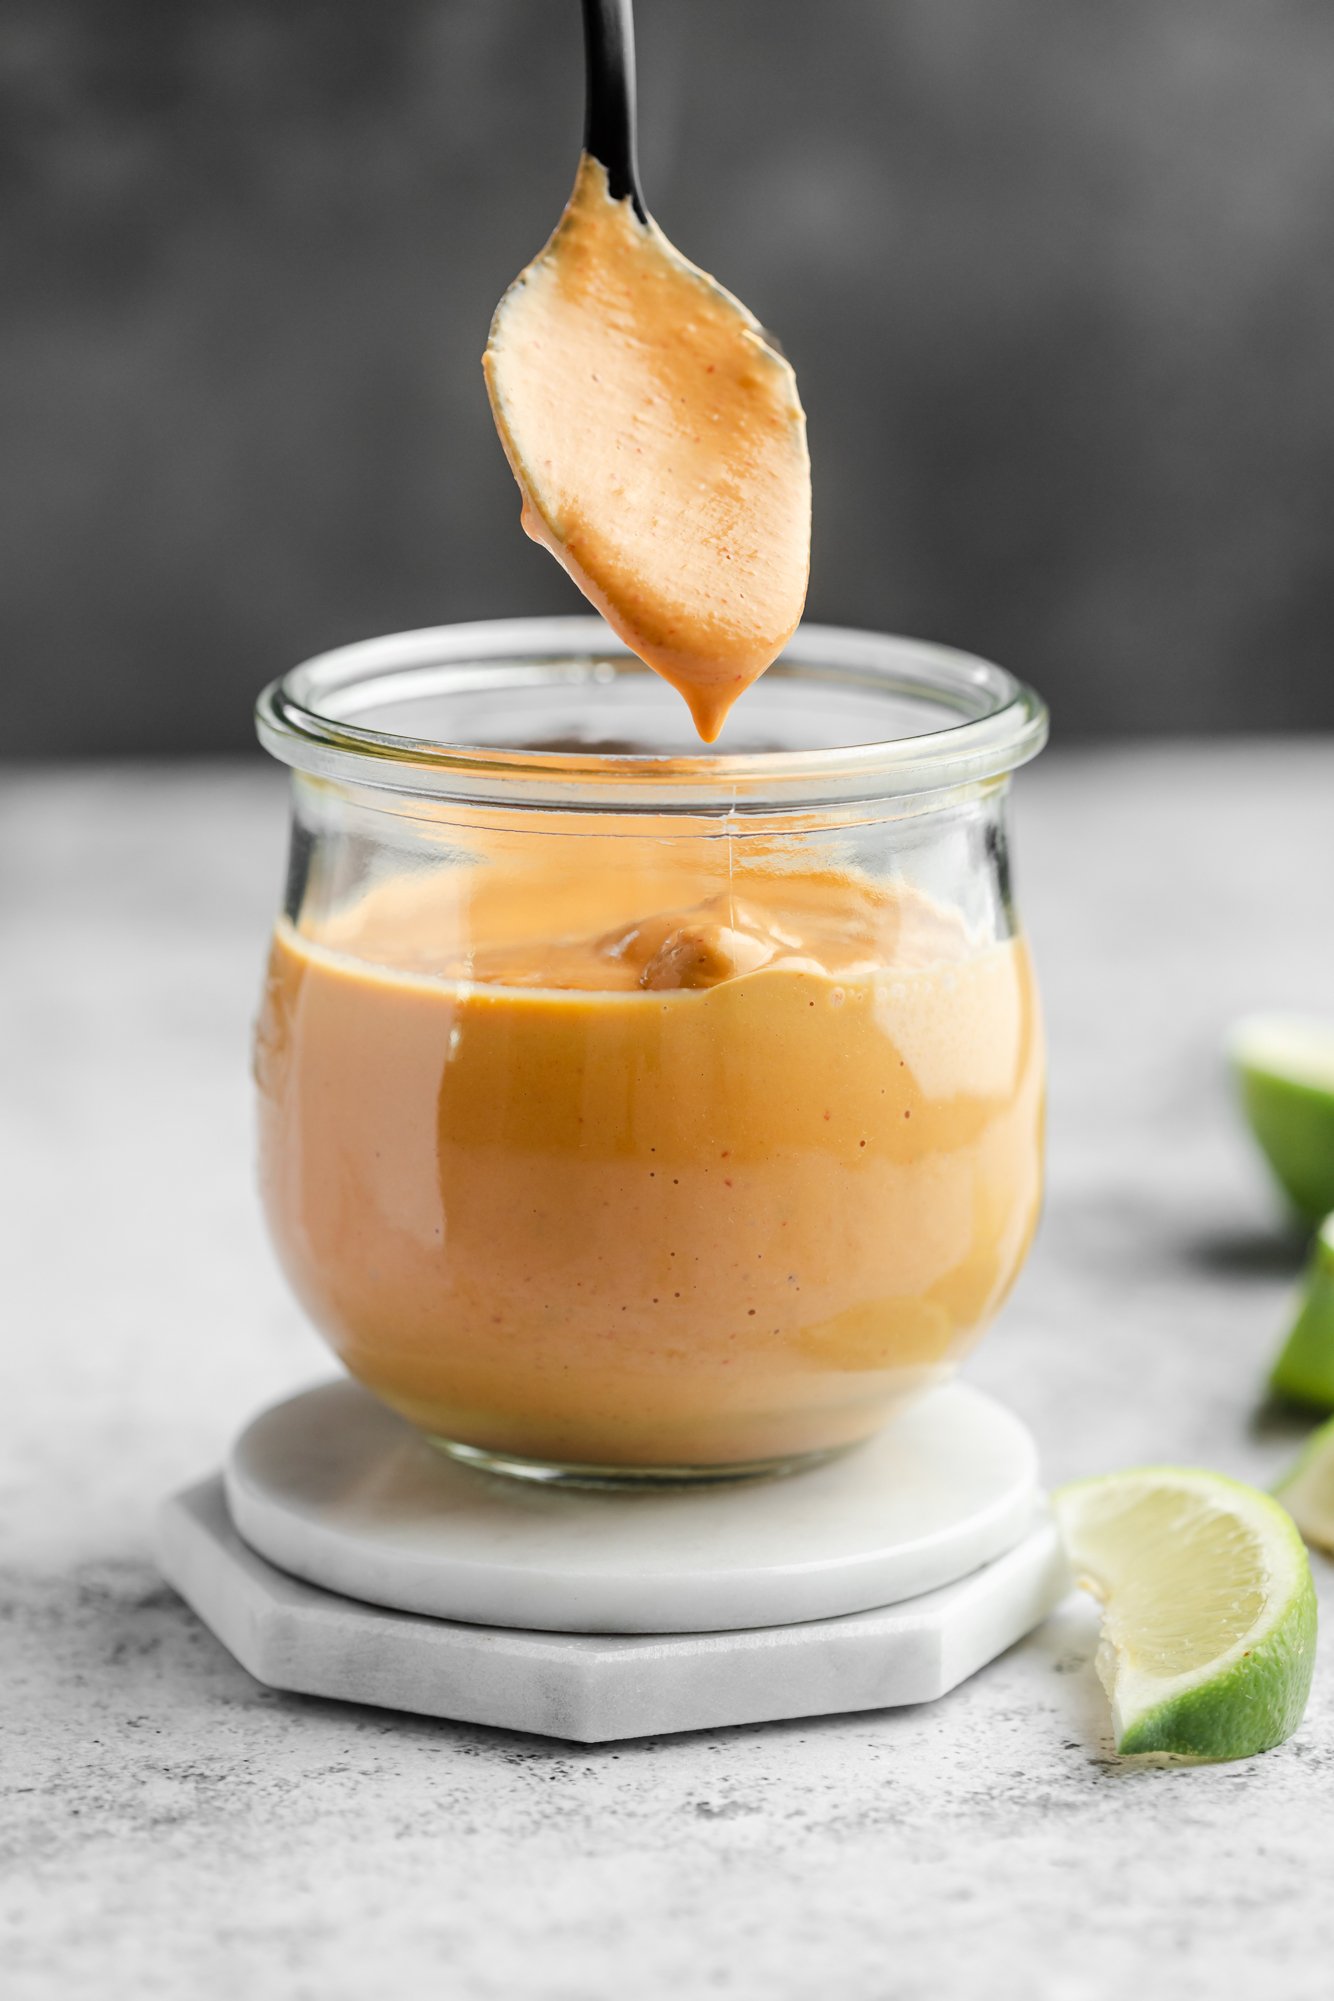 a spoon lifting up from a small glass jar of orange chipotle sauce.